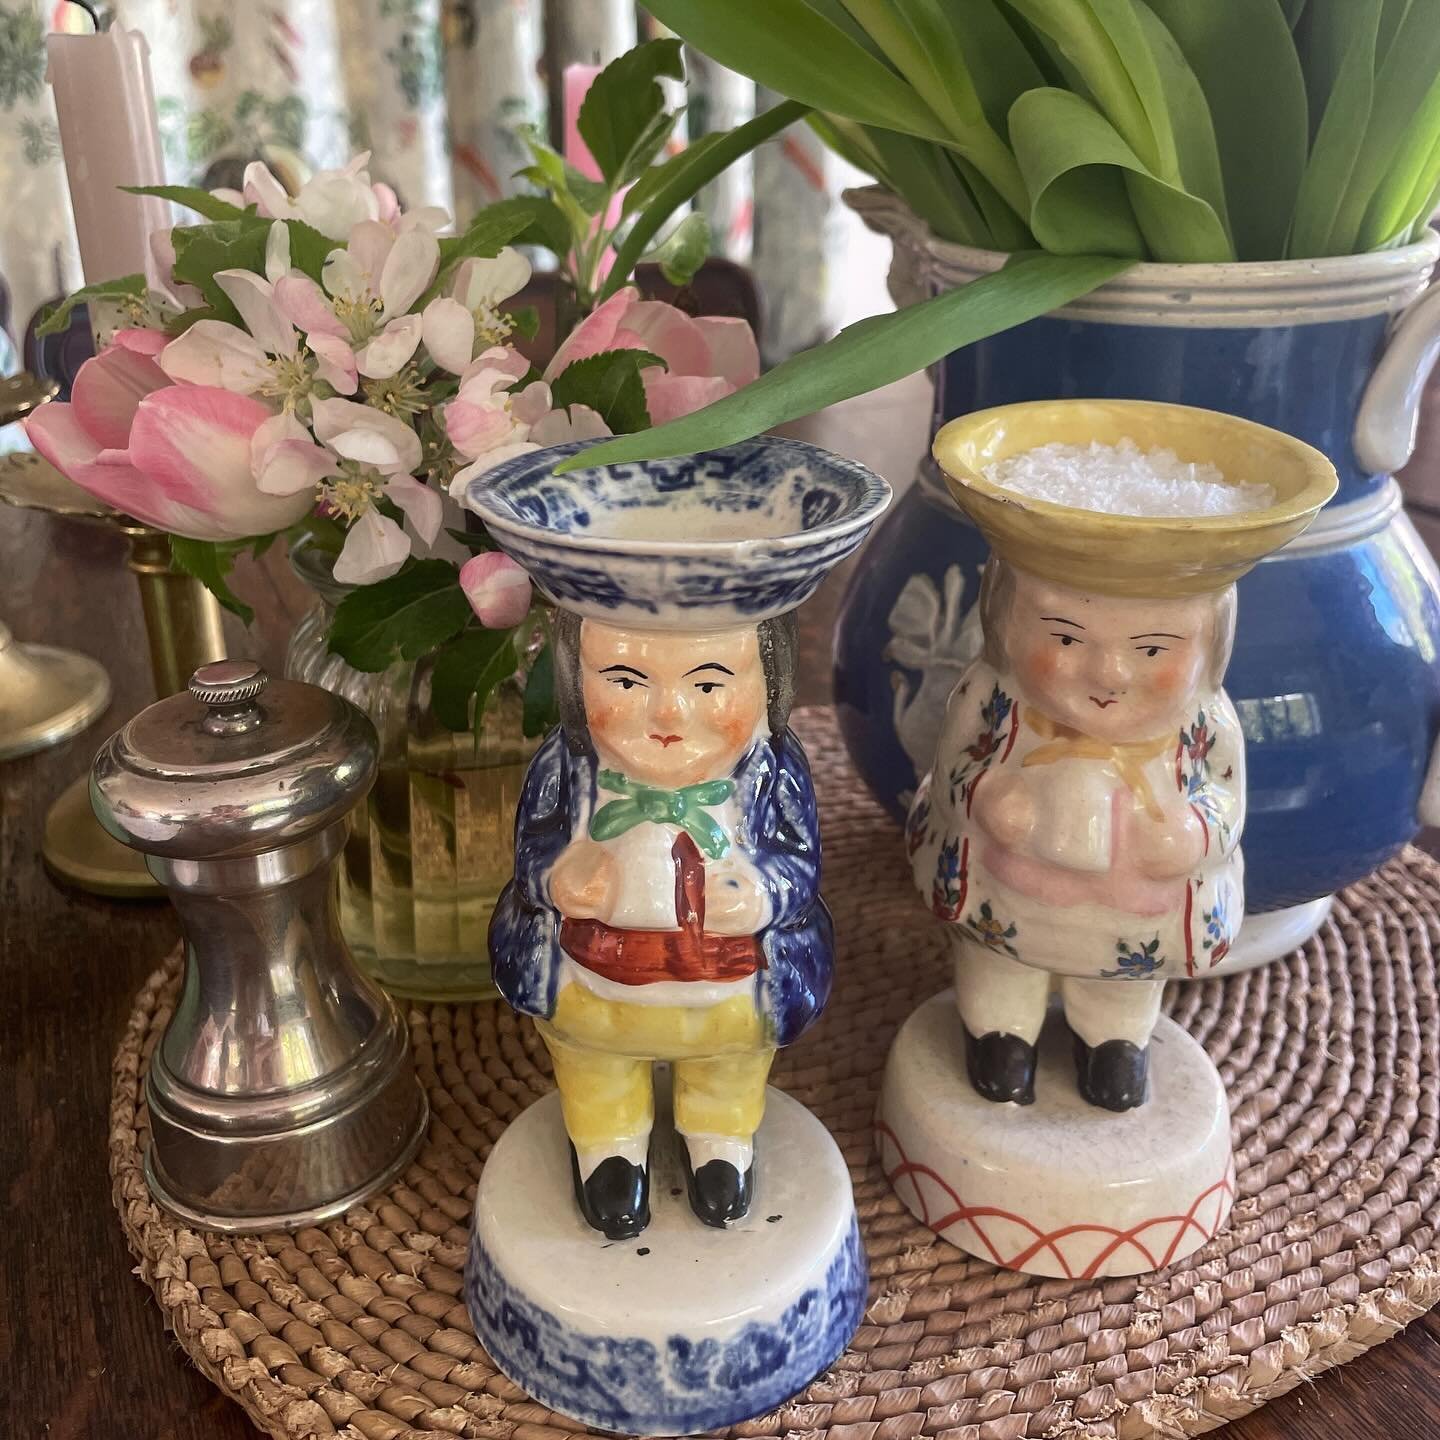 SOLD 🌟 A scarce 19th century Toby mustard pot. He is a stout little figure wearing a blue frock coat, rust red waistcoat, green neckerchief and lemon breeches. The hat and base are transfer printed in a blue willow pattern. His hat forms a little bo